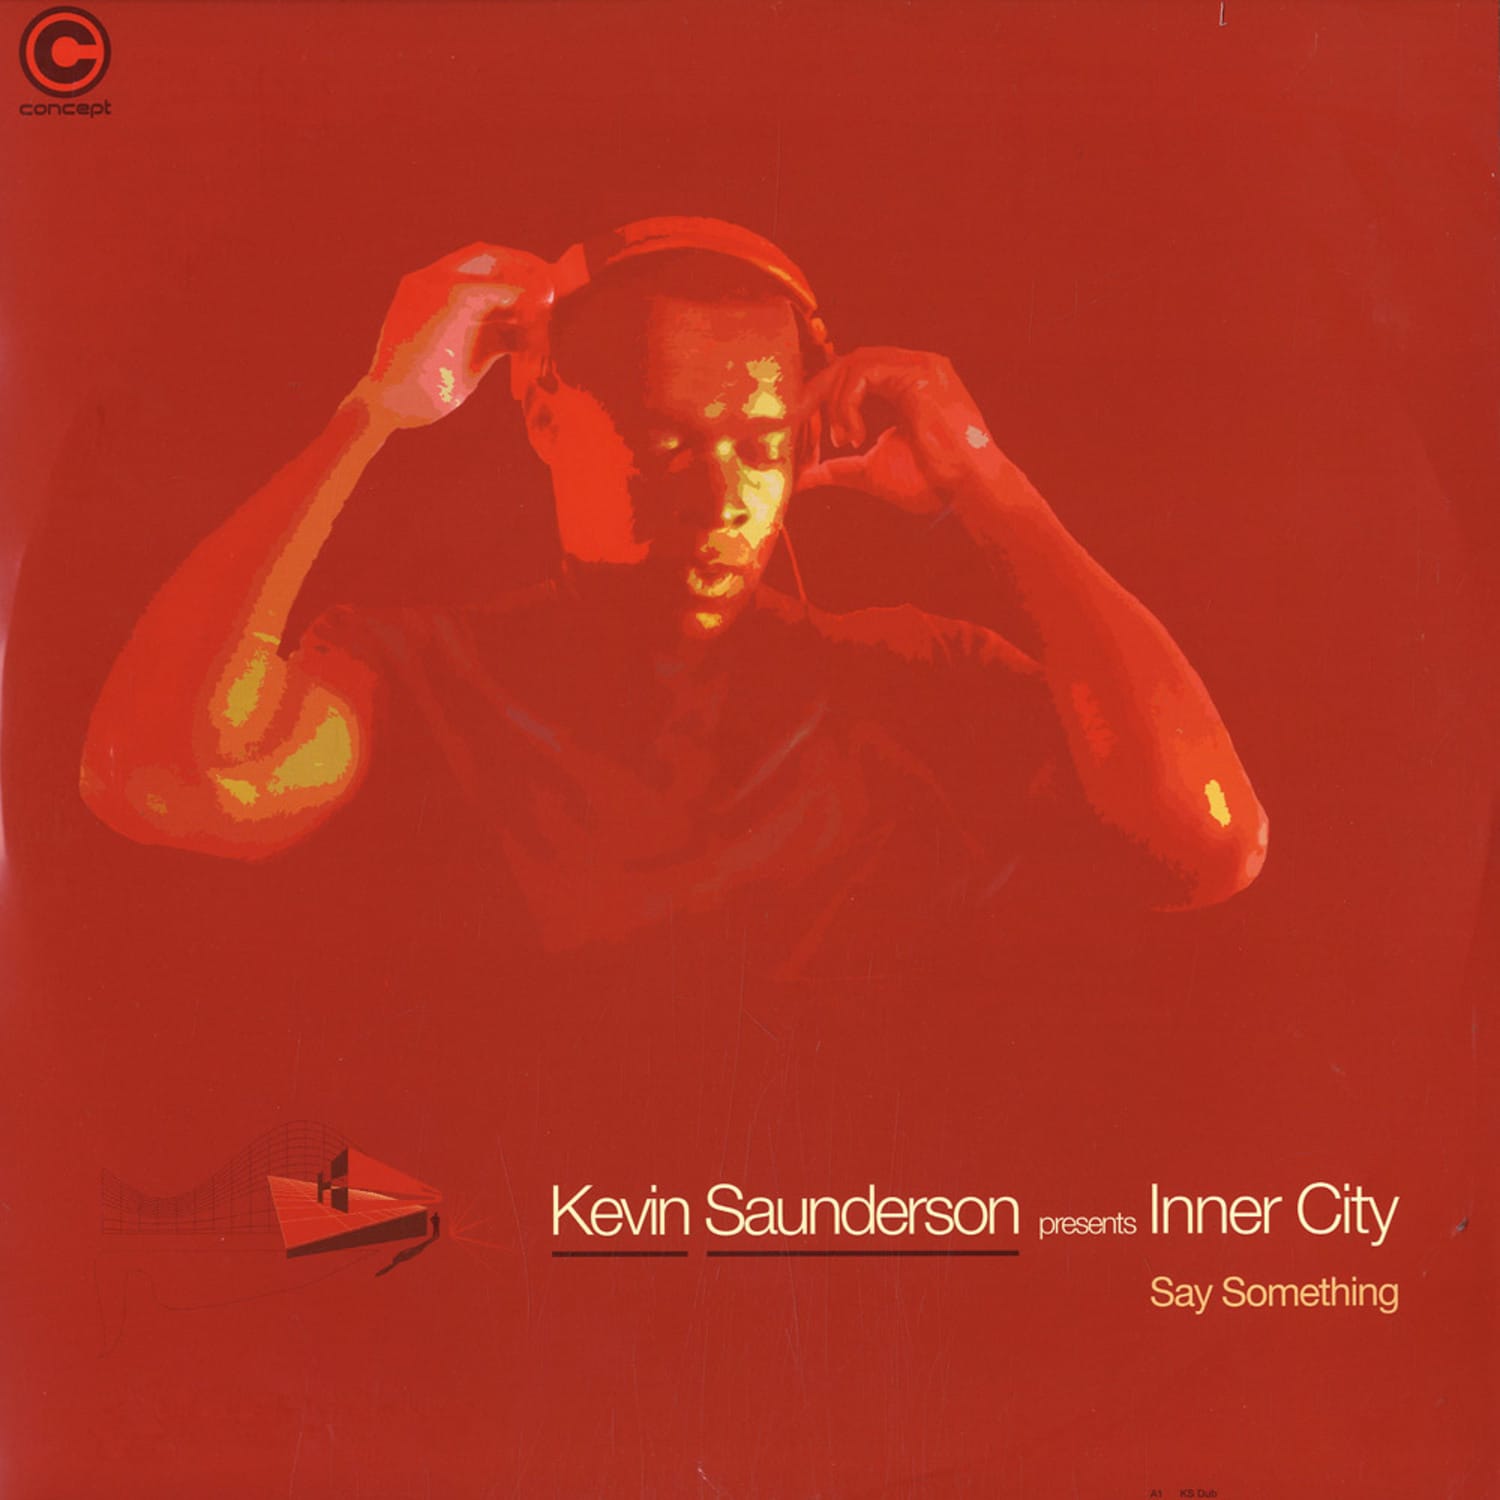 Kevin Saunderson pres. Inner City - SAY SOMETHING 